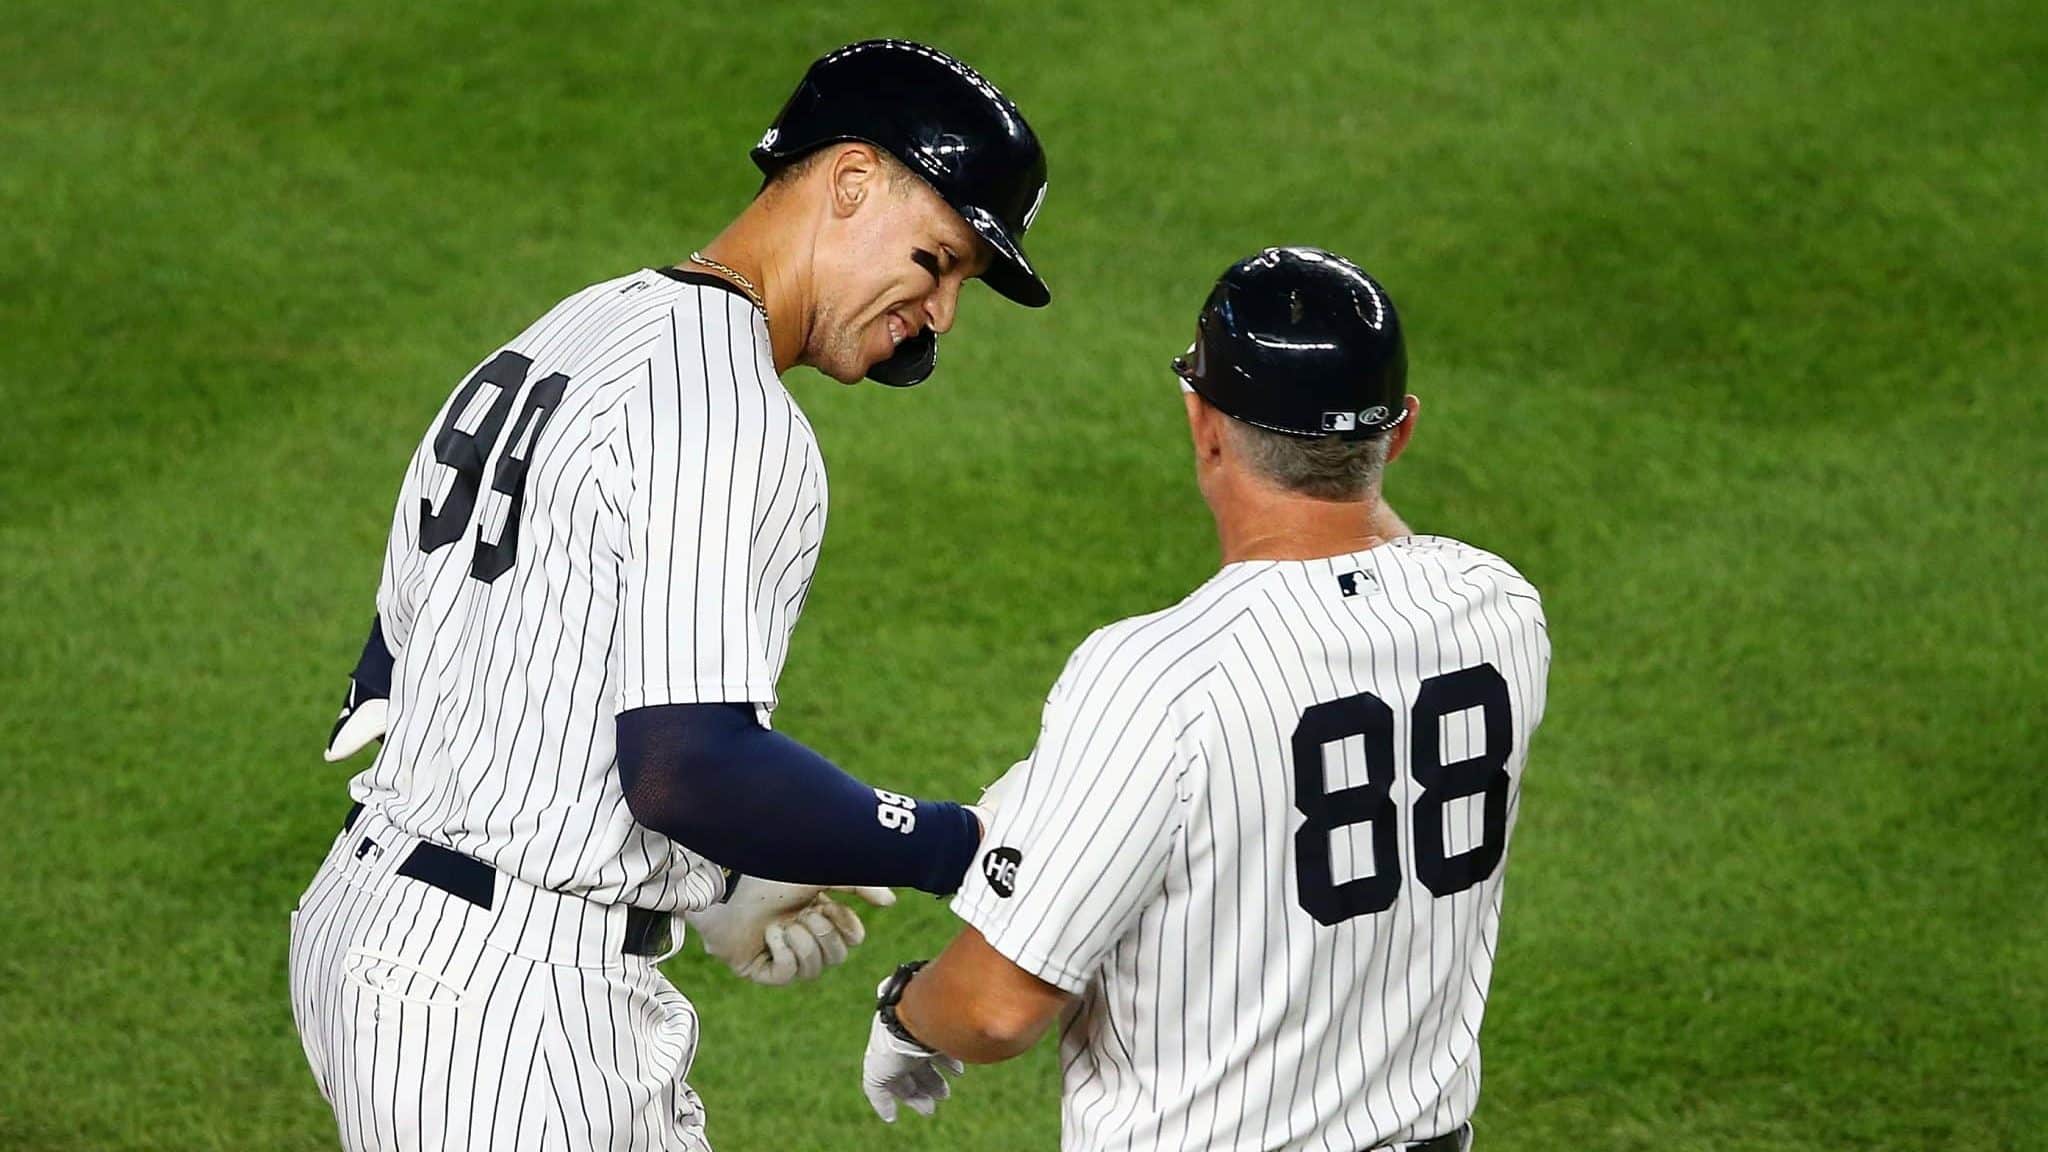 NEW YORK, NEW YORK - AUGUST 02: Aaron Judge #99 of the New York Yankees celebrates after hitting a 2-run home run in the bottom of the eighth inning against the Boston Red Sox at Yankee Stadium on August 02, 2020 in New York City.